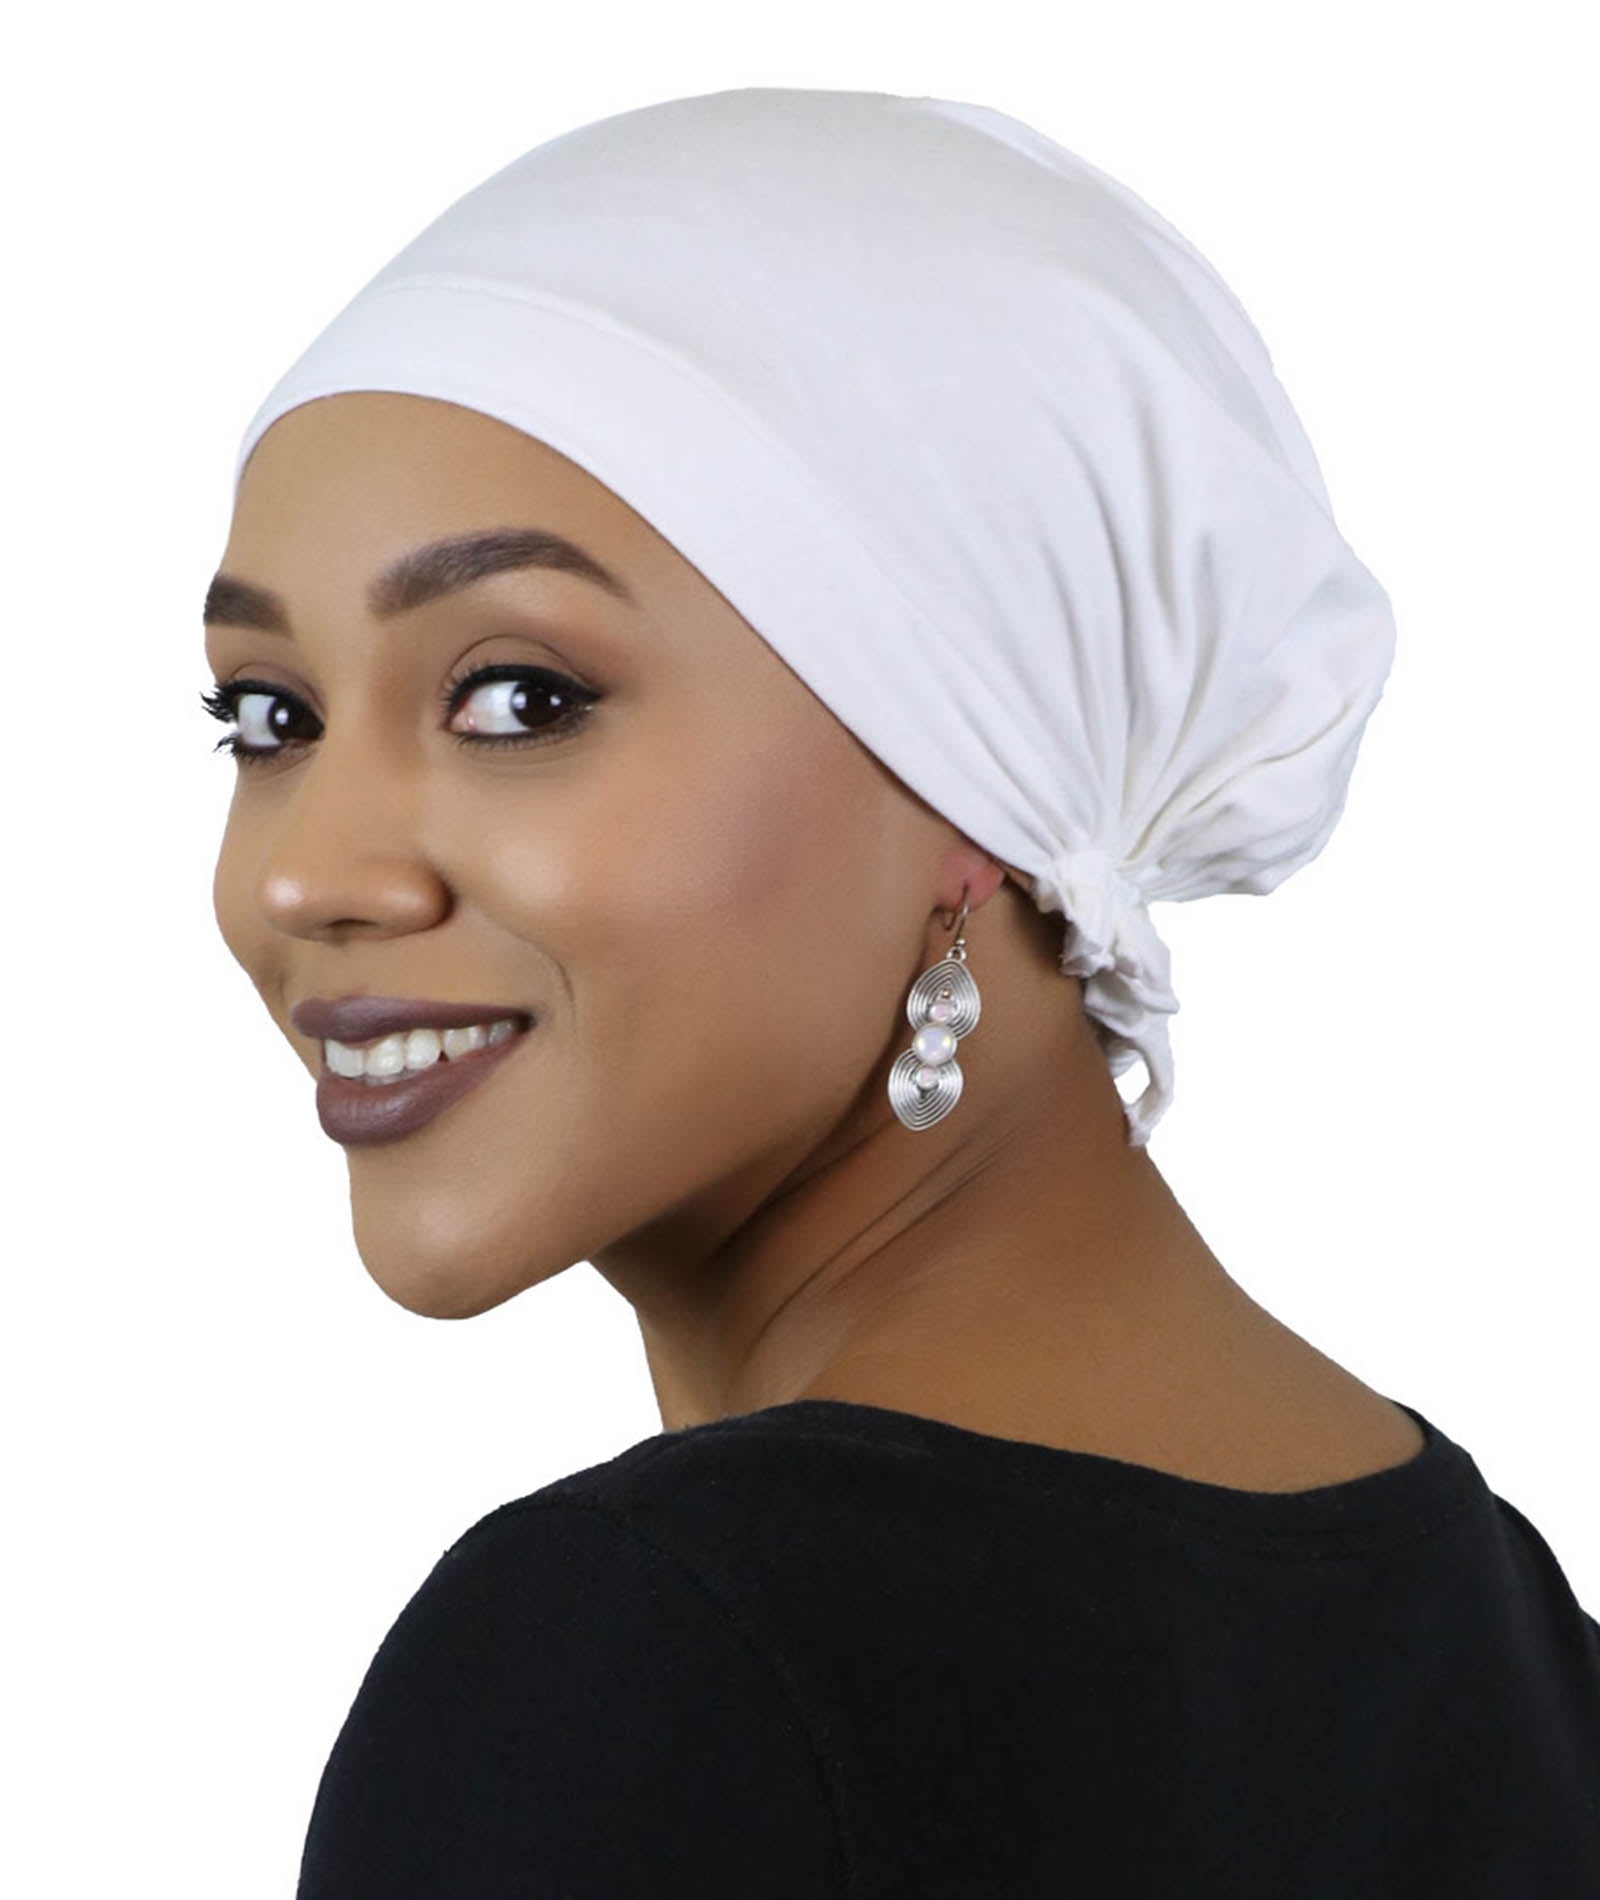 How to tie a head scarf for cancer patients 